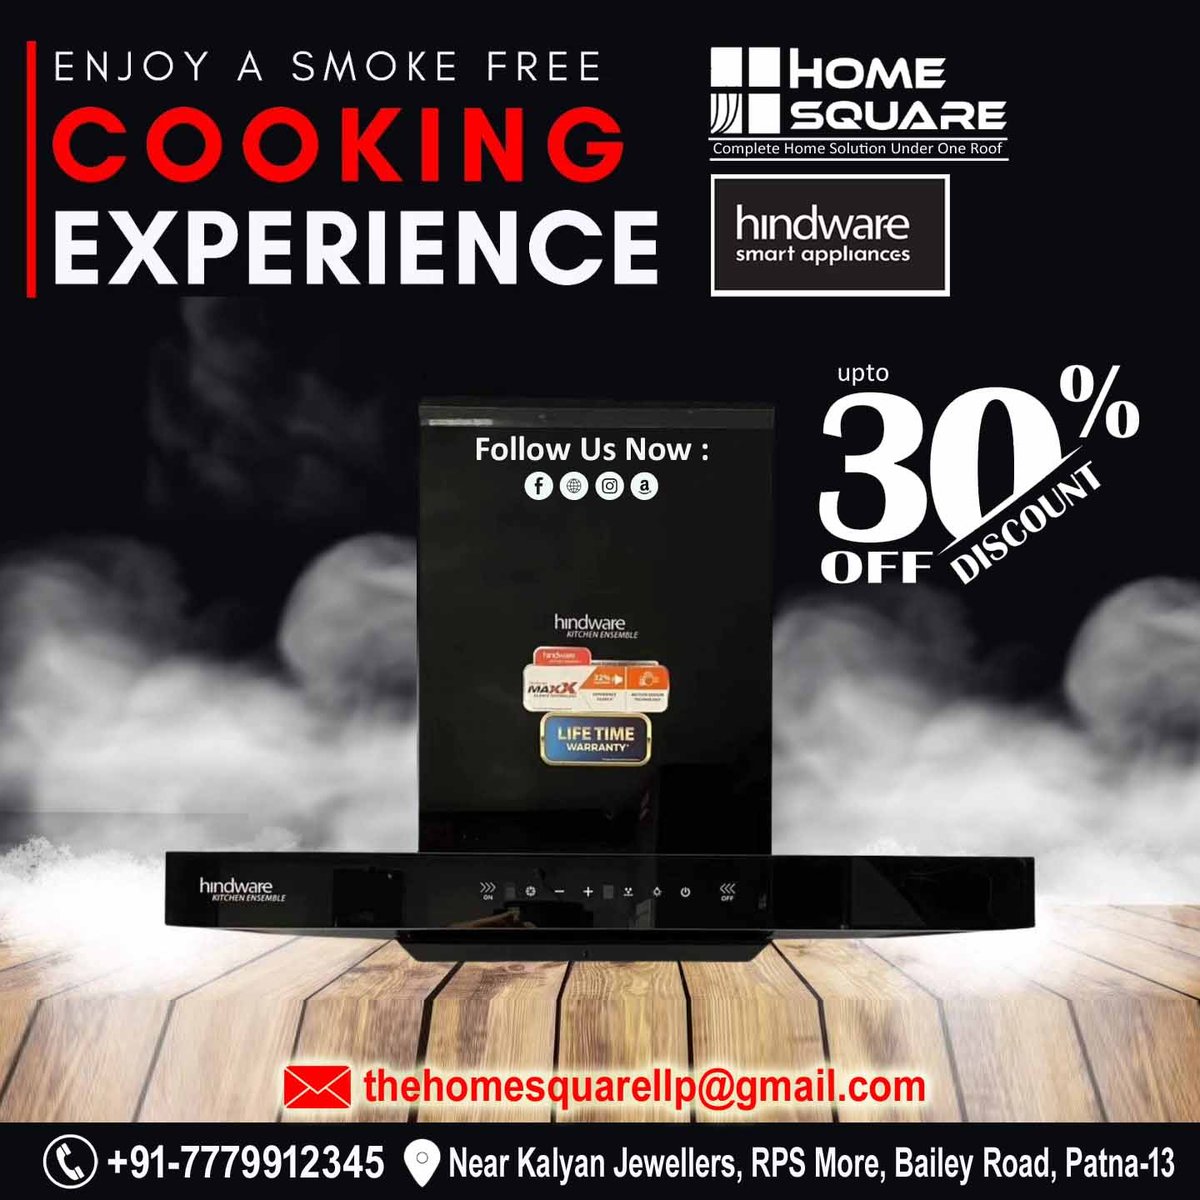 🎉🔥 Don't Miss Out! Get Your Dream Hindware Chimney at 30% Off, Only at Our Exclusive Showroom! 🔥🎉

#ExclusiveOffer #HindwareChimney #UpgradeYourKitchen #KitchenAppliances #CookingInStyle #homesquareshowroom